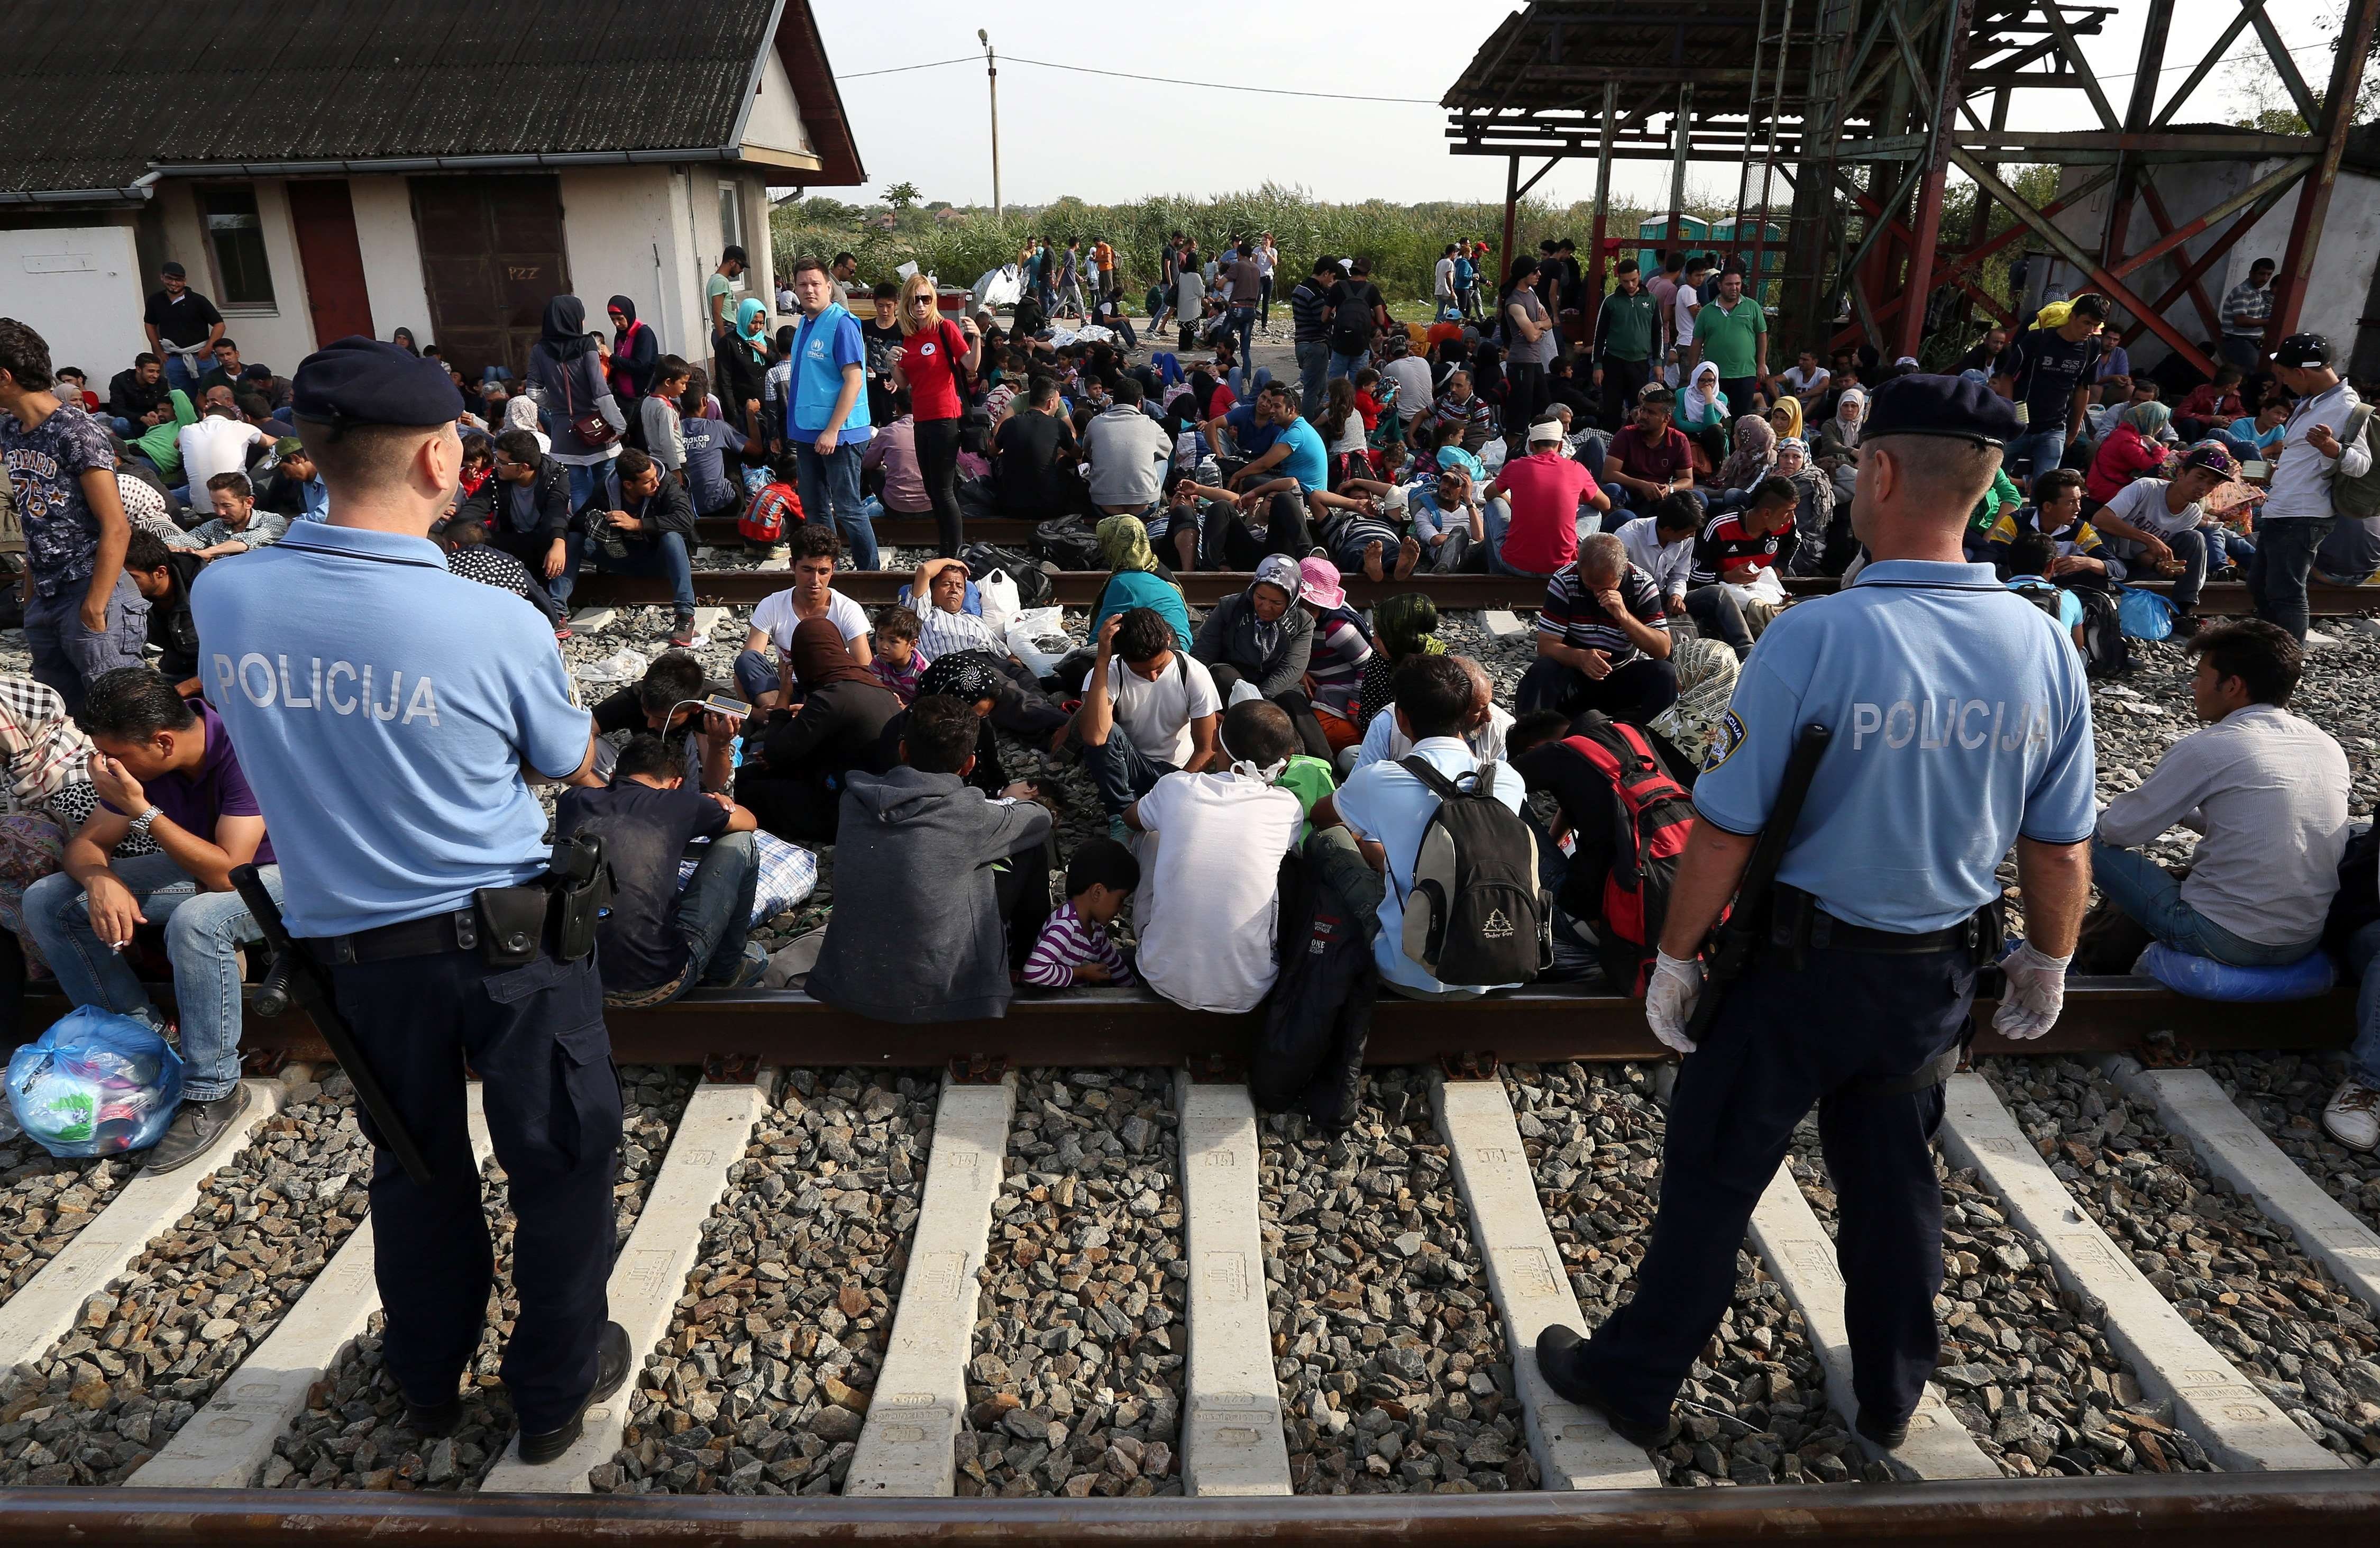 Migrants wait for a train at  a railway station, near the official border  between Serbia and Croatia, near Eastern-Croatian town of Tovarnik, on Sept. 17, 2015. (AFP/Getty Images)